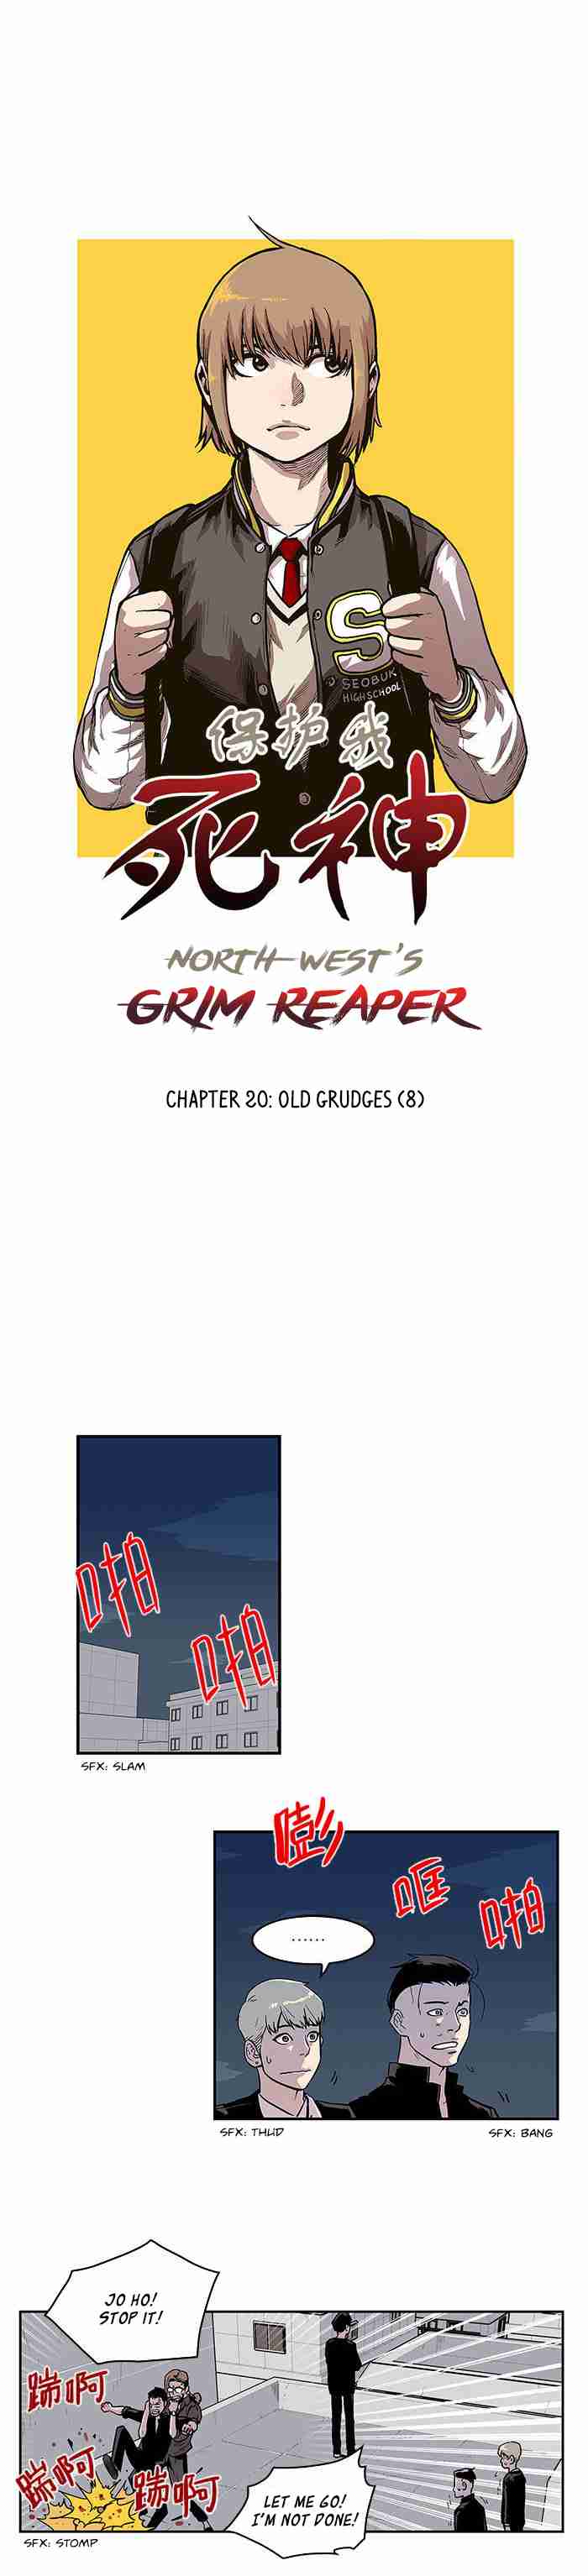 West North's Grim Reaper Ch. 20 Old Grudges (End)